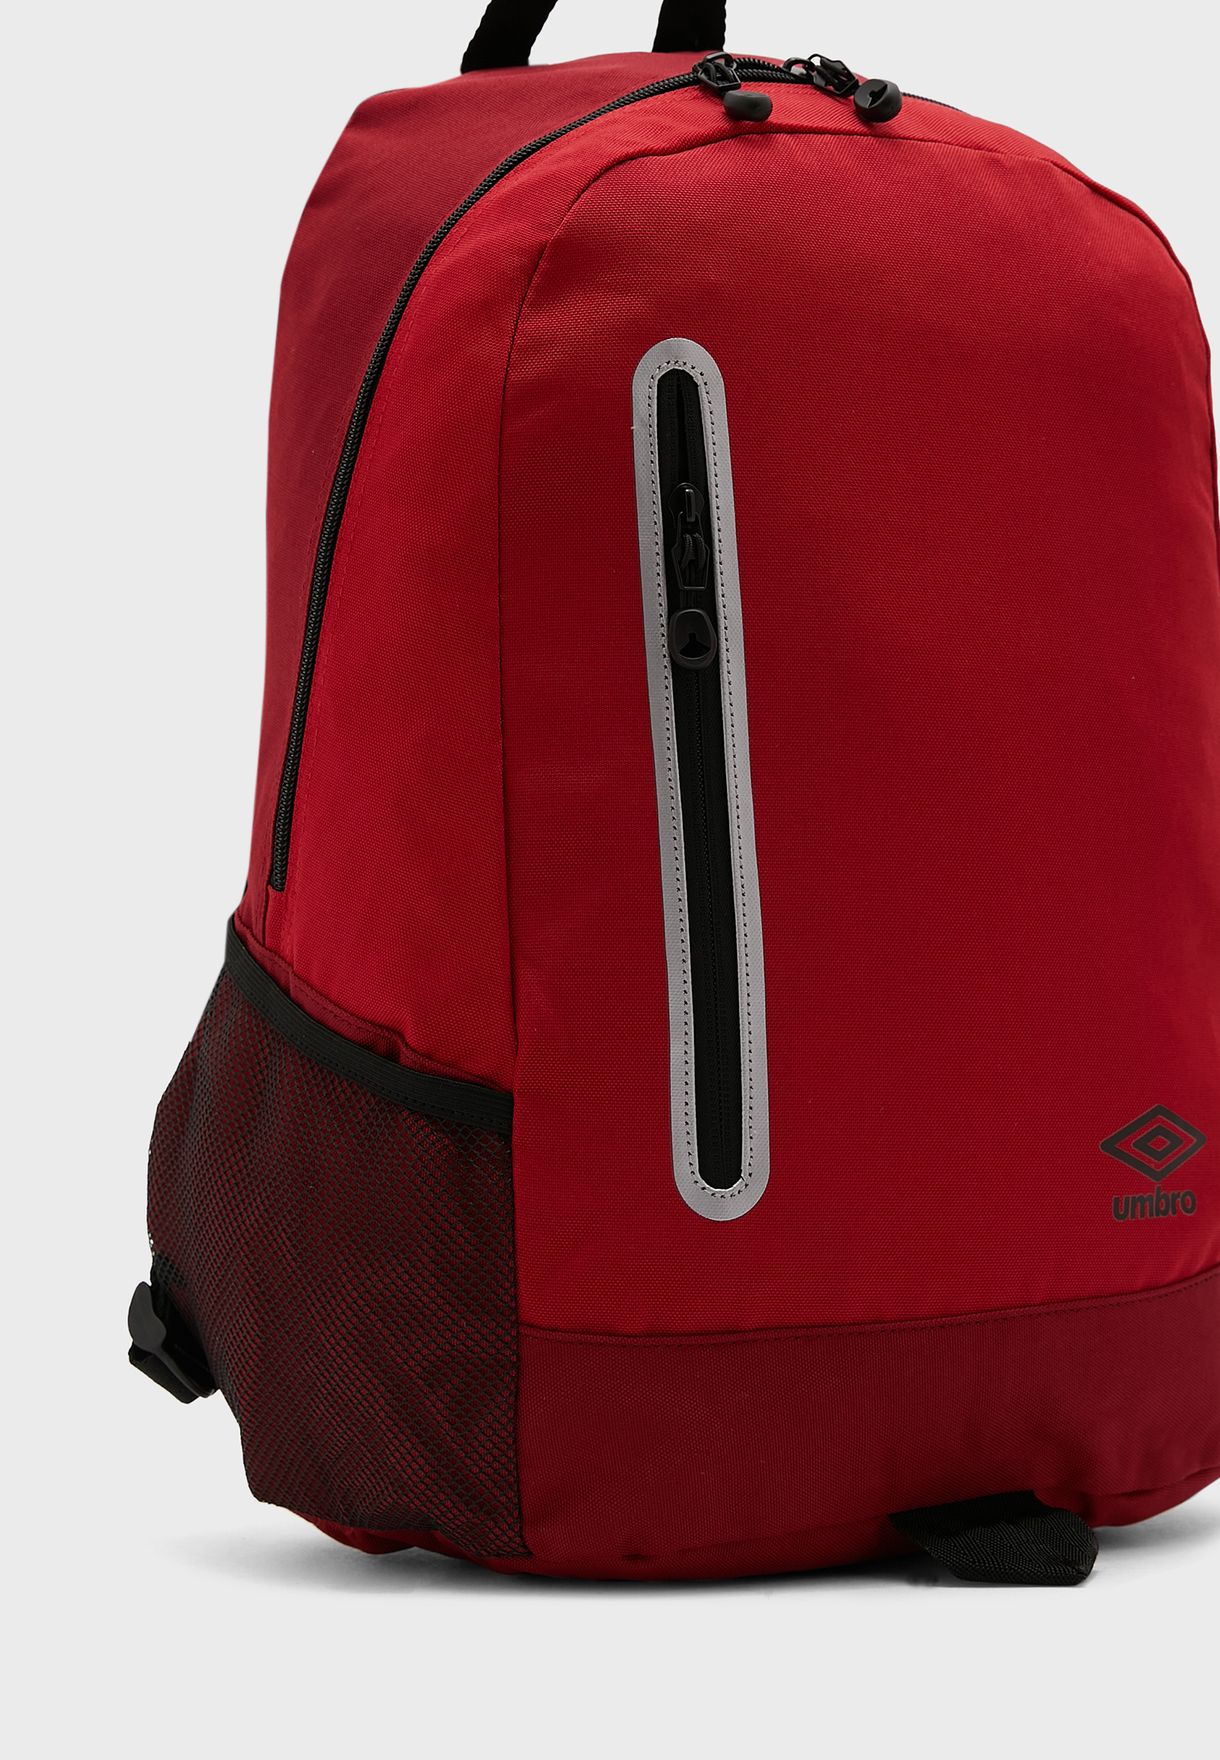 Paton Back To School Backpack